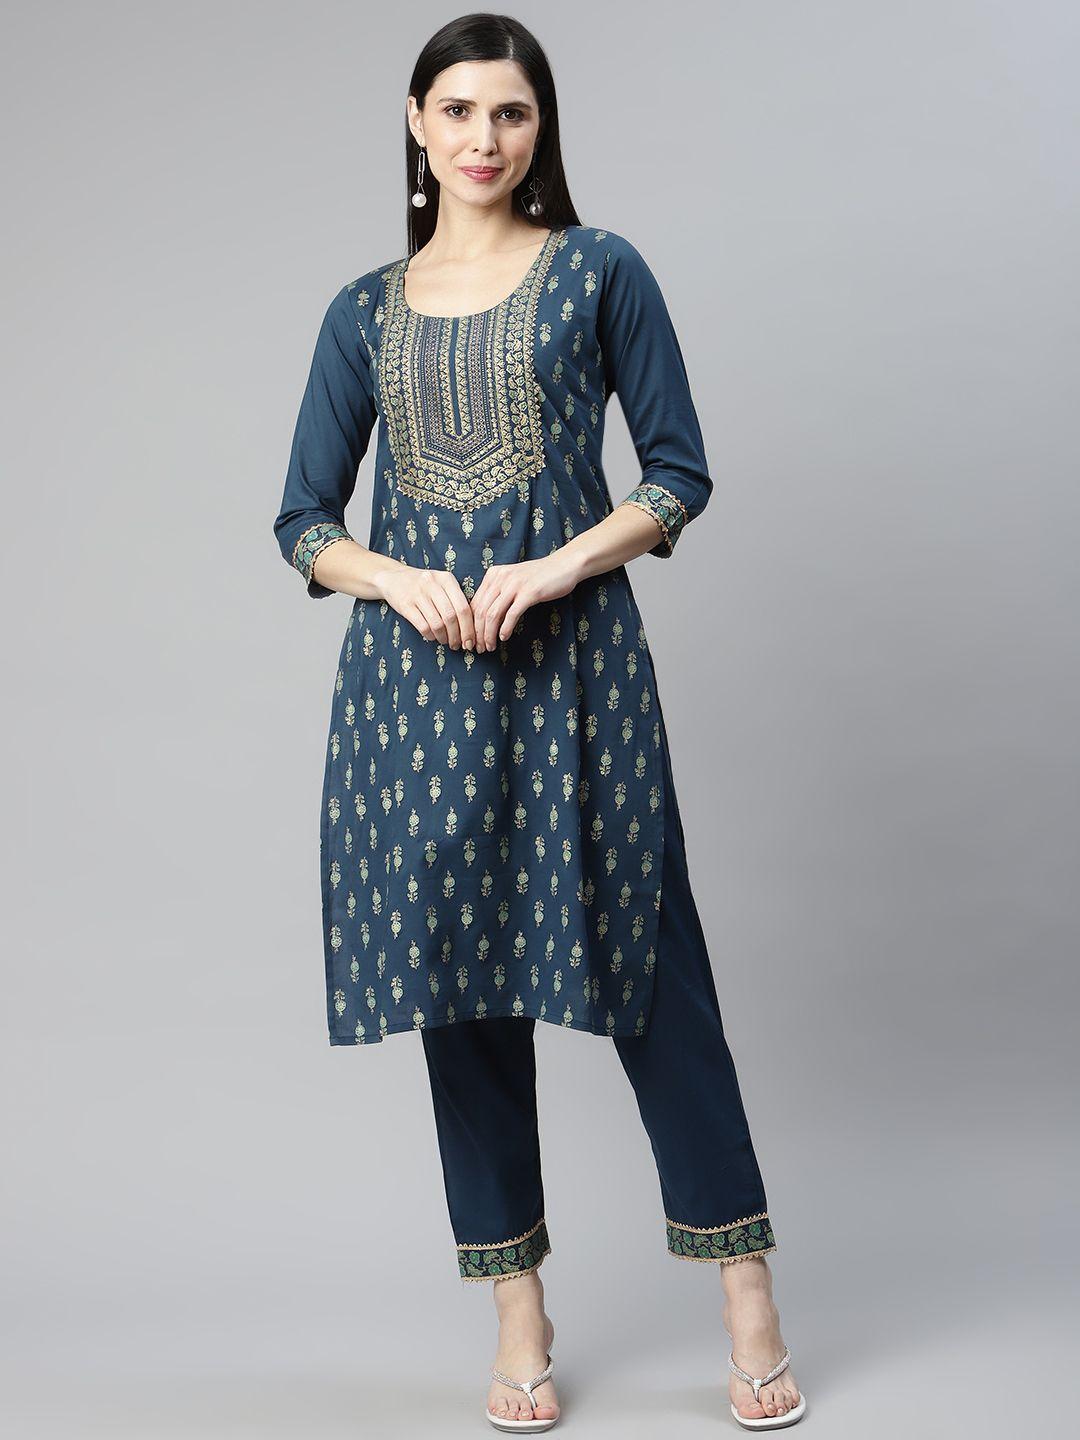 silver stock  blue floral printed pure cotton kurta with palazzos